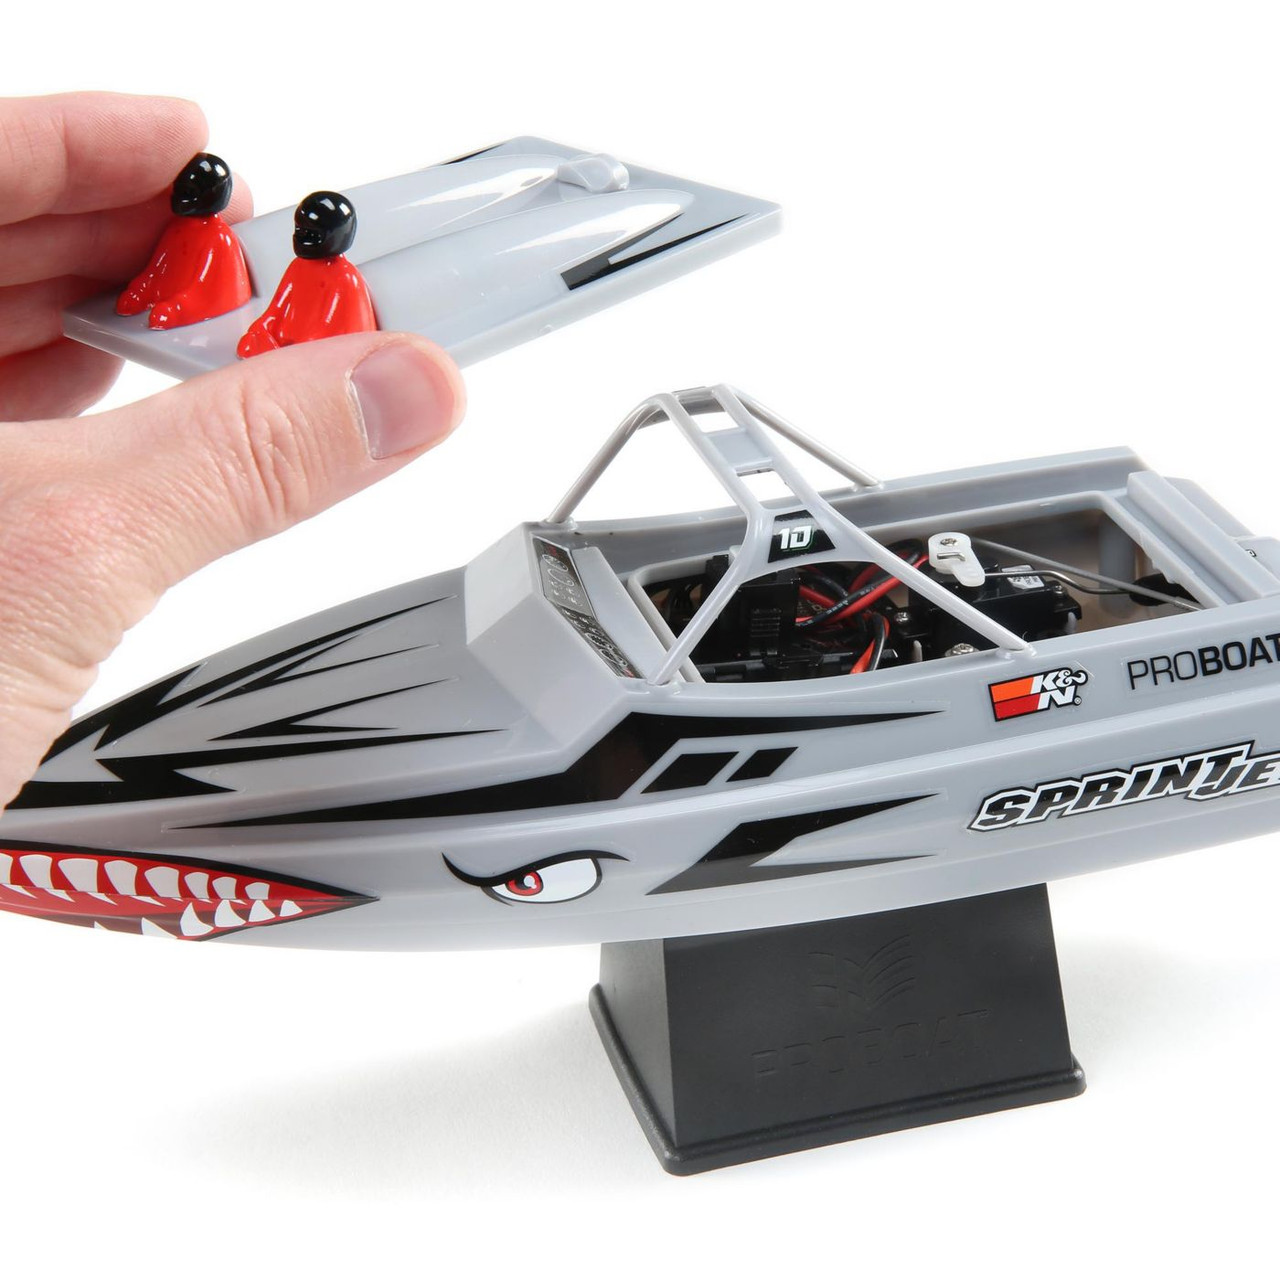 Pro Boat Sprintjet 9 Inch Self-Righting RTR Electric Jet Boat w/2.4GHz Radio, Battery and Charger (Silver)